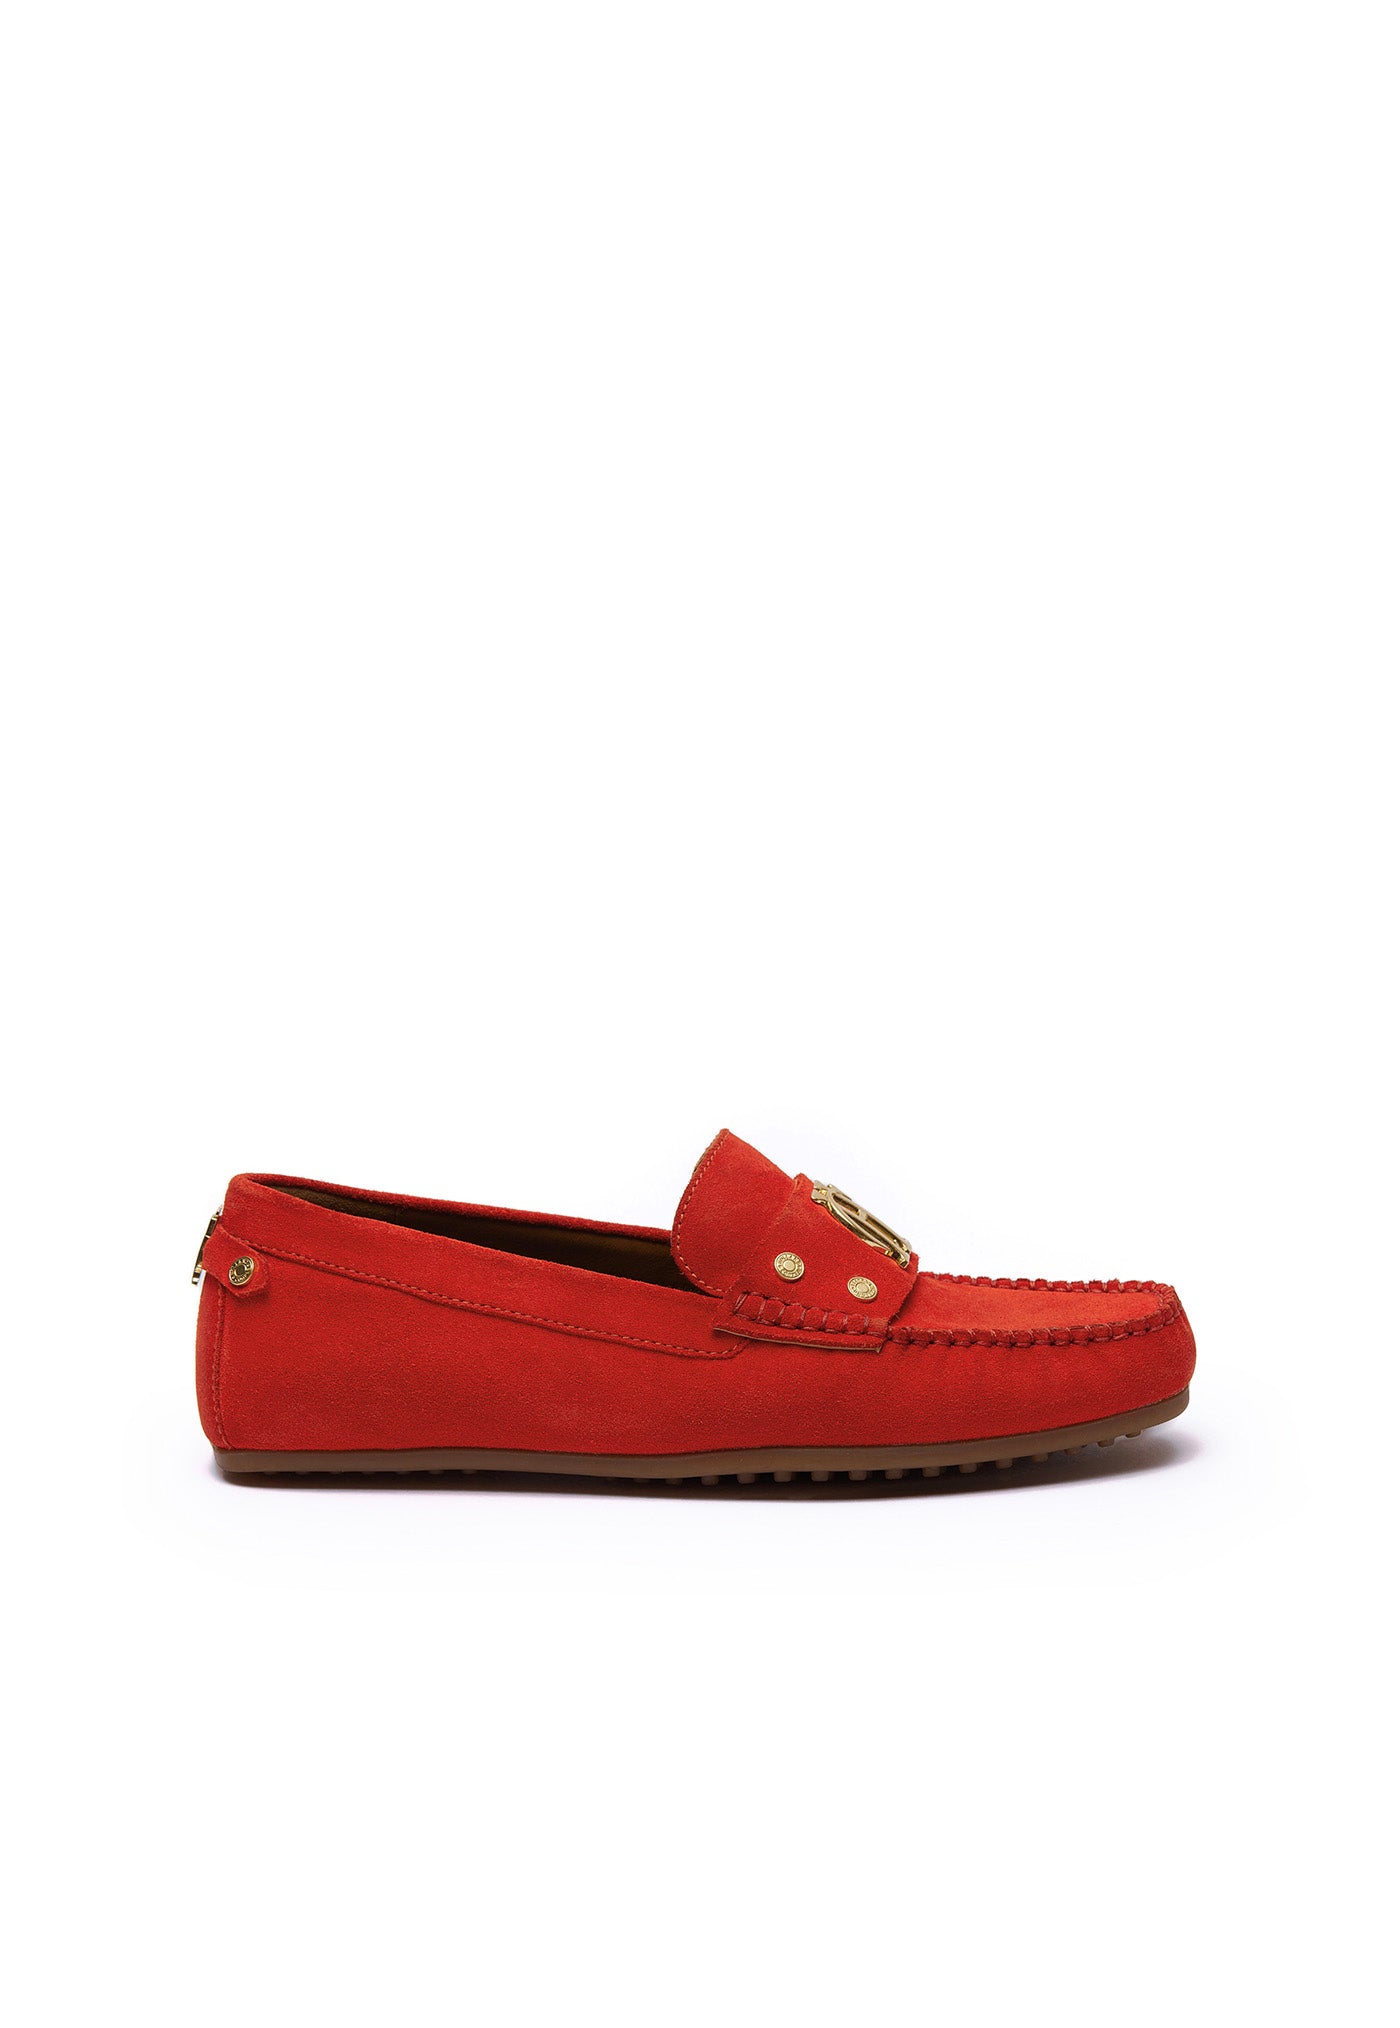 The Driving Loafer - Neroli sold by Angel Divine